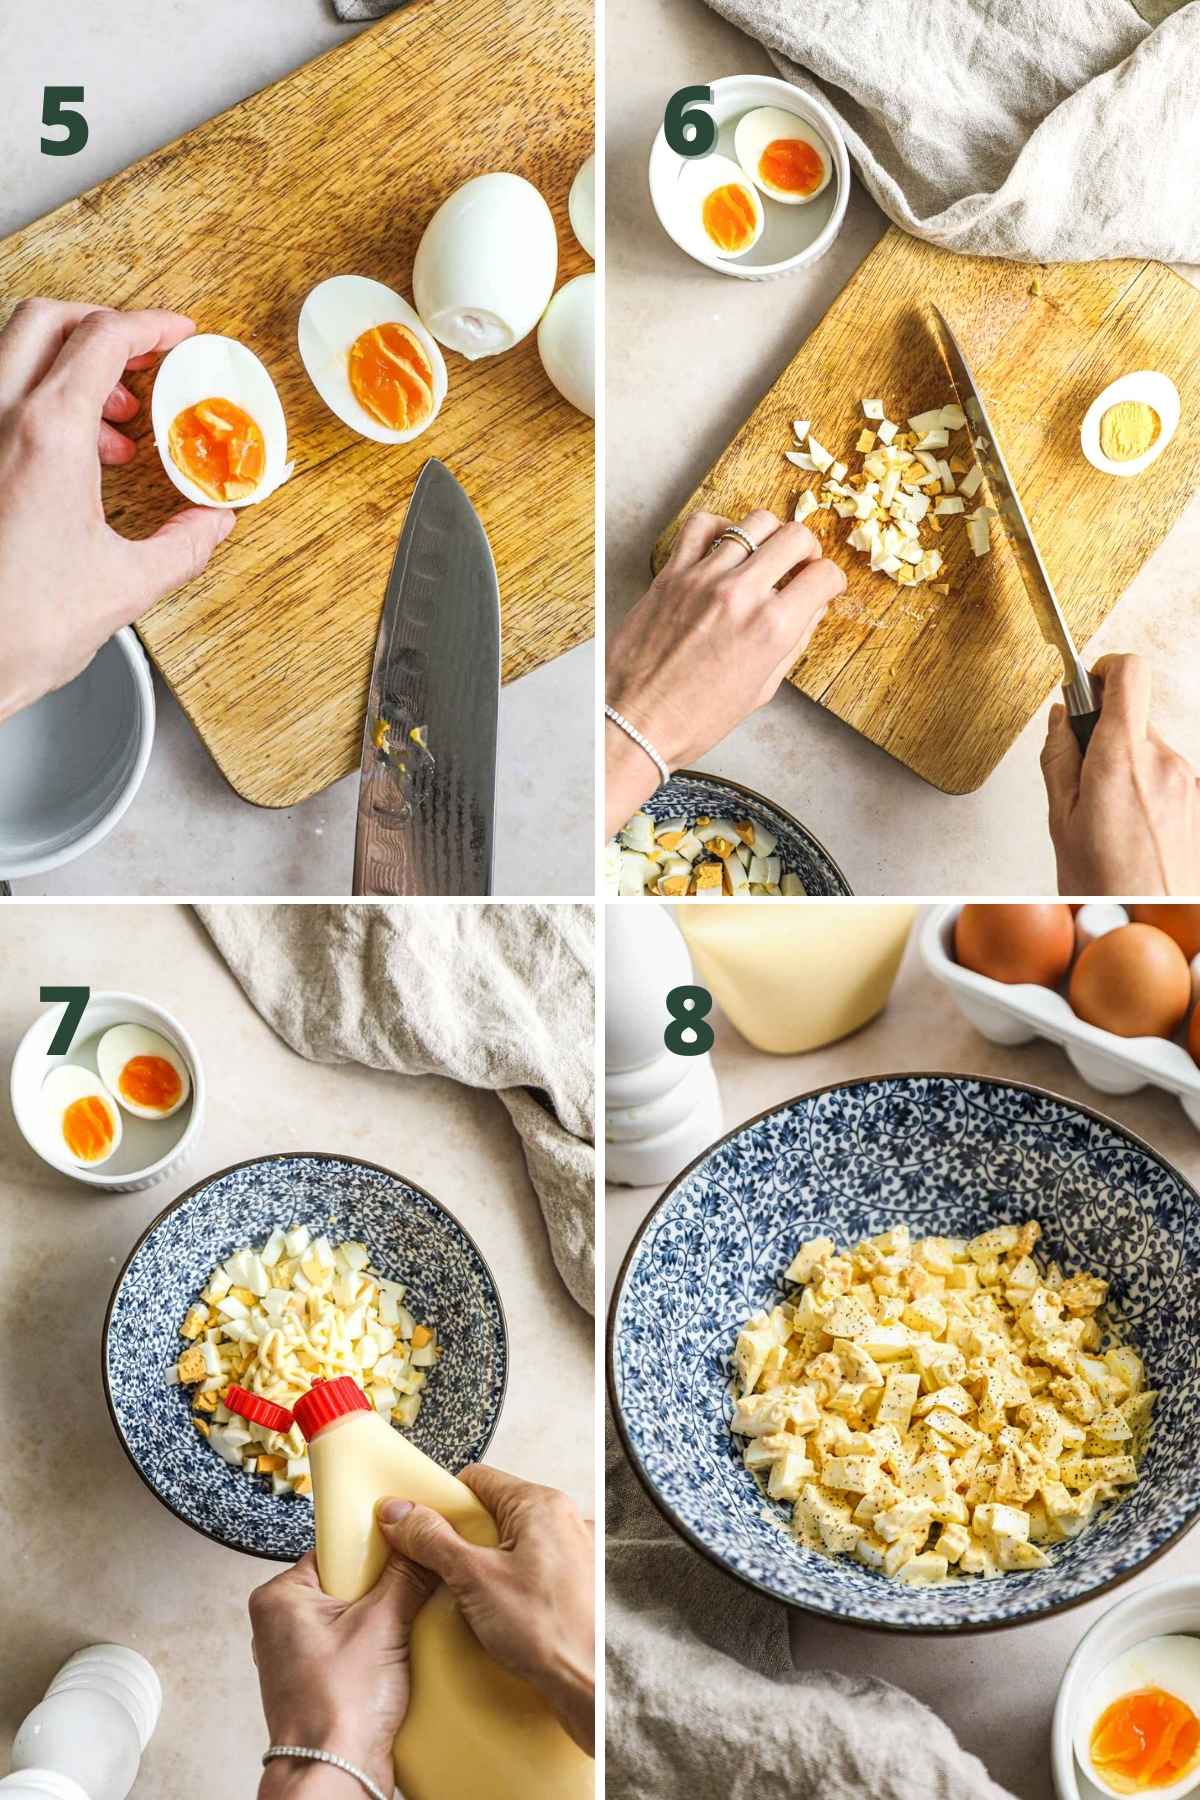 Steps to make tamago sando (Japanese egg salad sandwich), including slicing the jammy egg in half, chopping the hard boiled eggs, adding kewpie mayo, salt, and pepper to the egg salad, and mixing.